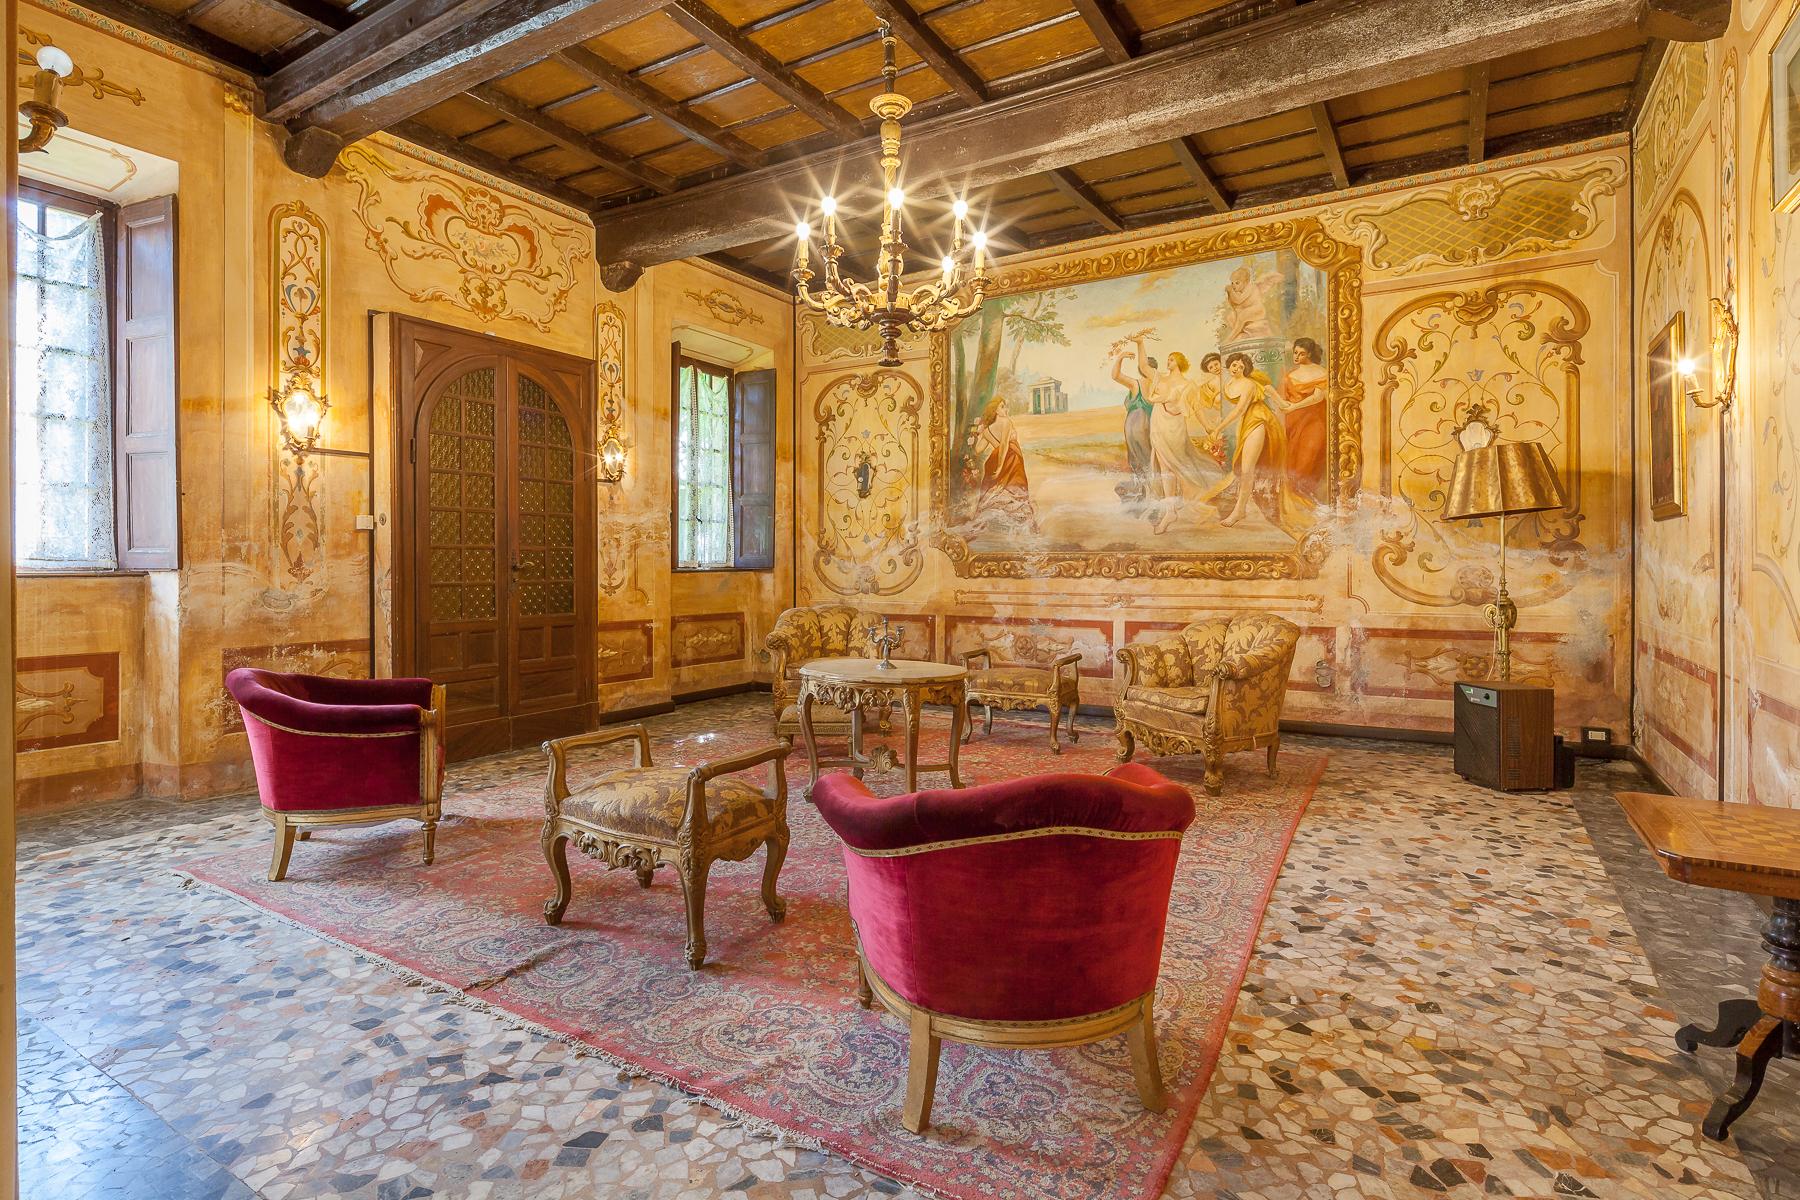 Late 18th century castle in the Novara hills - 15